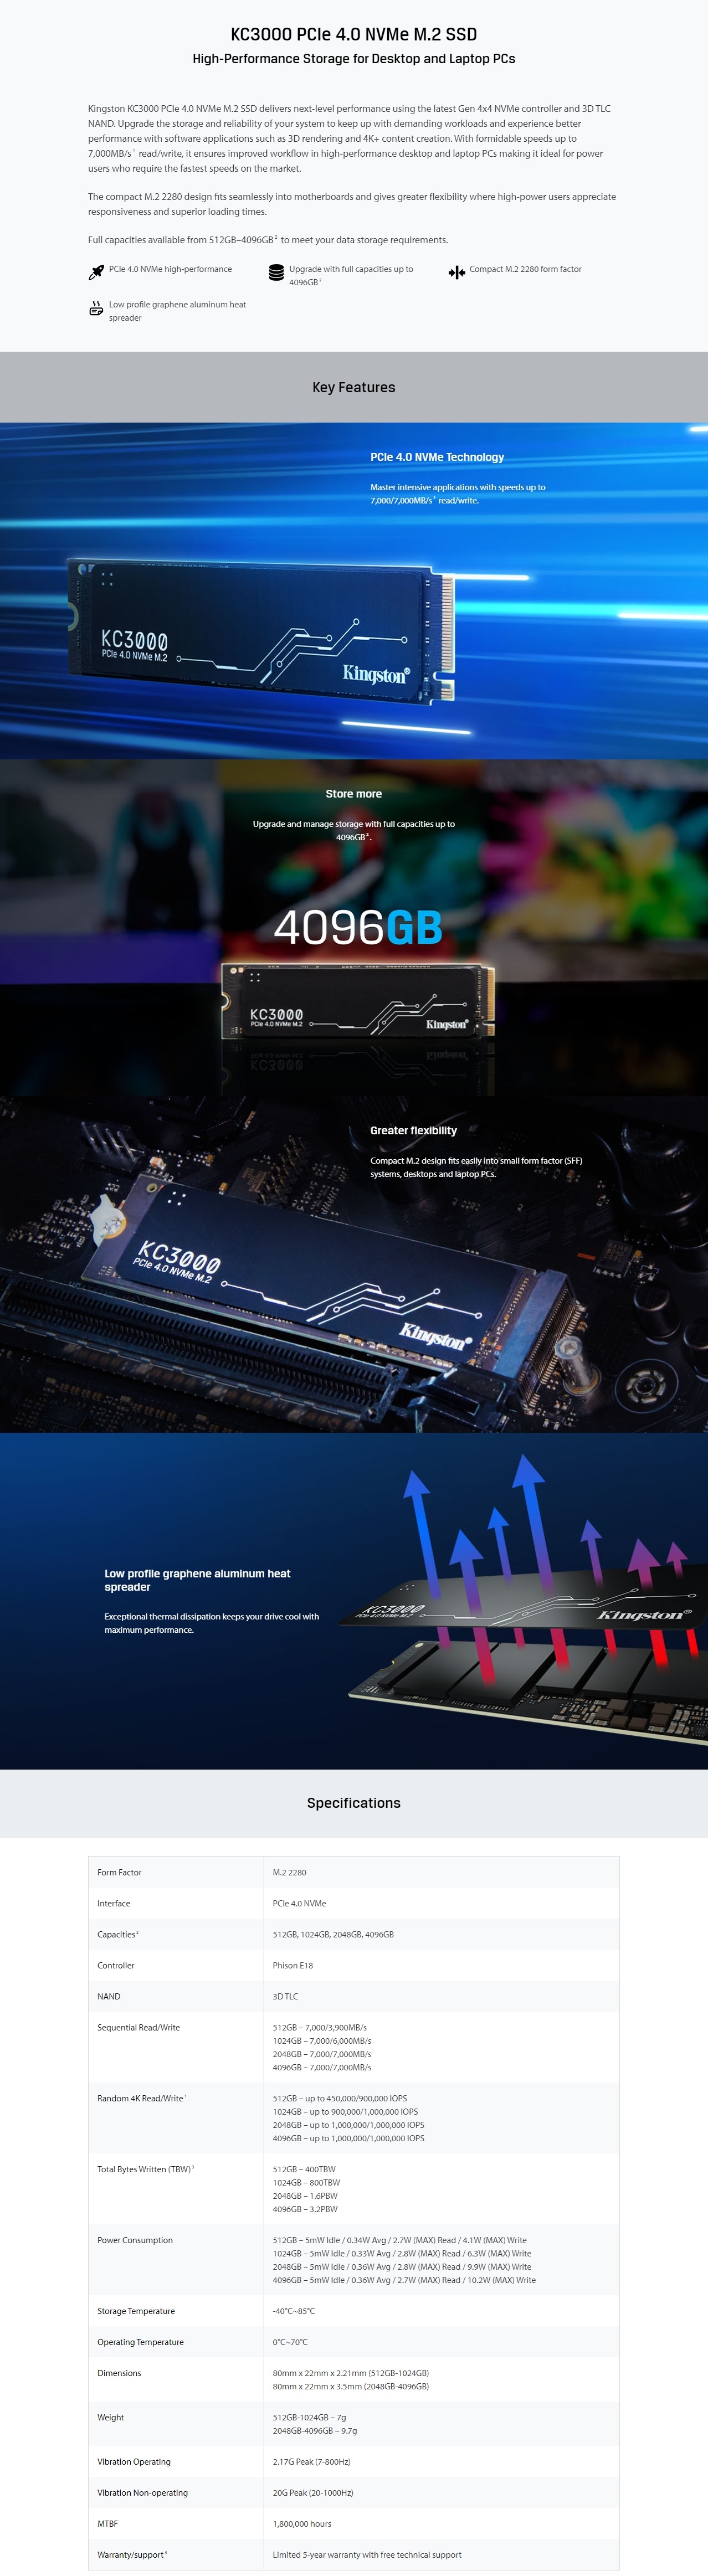 A large marketing image providing additional information about the product Kingston KC3000 PCIe Gen4 NVMe M.2 SSD - 1TB - Additional alt info not provided